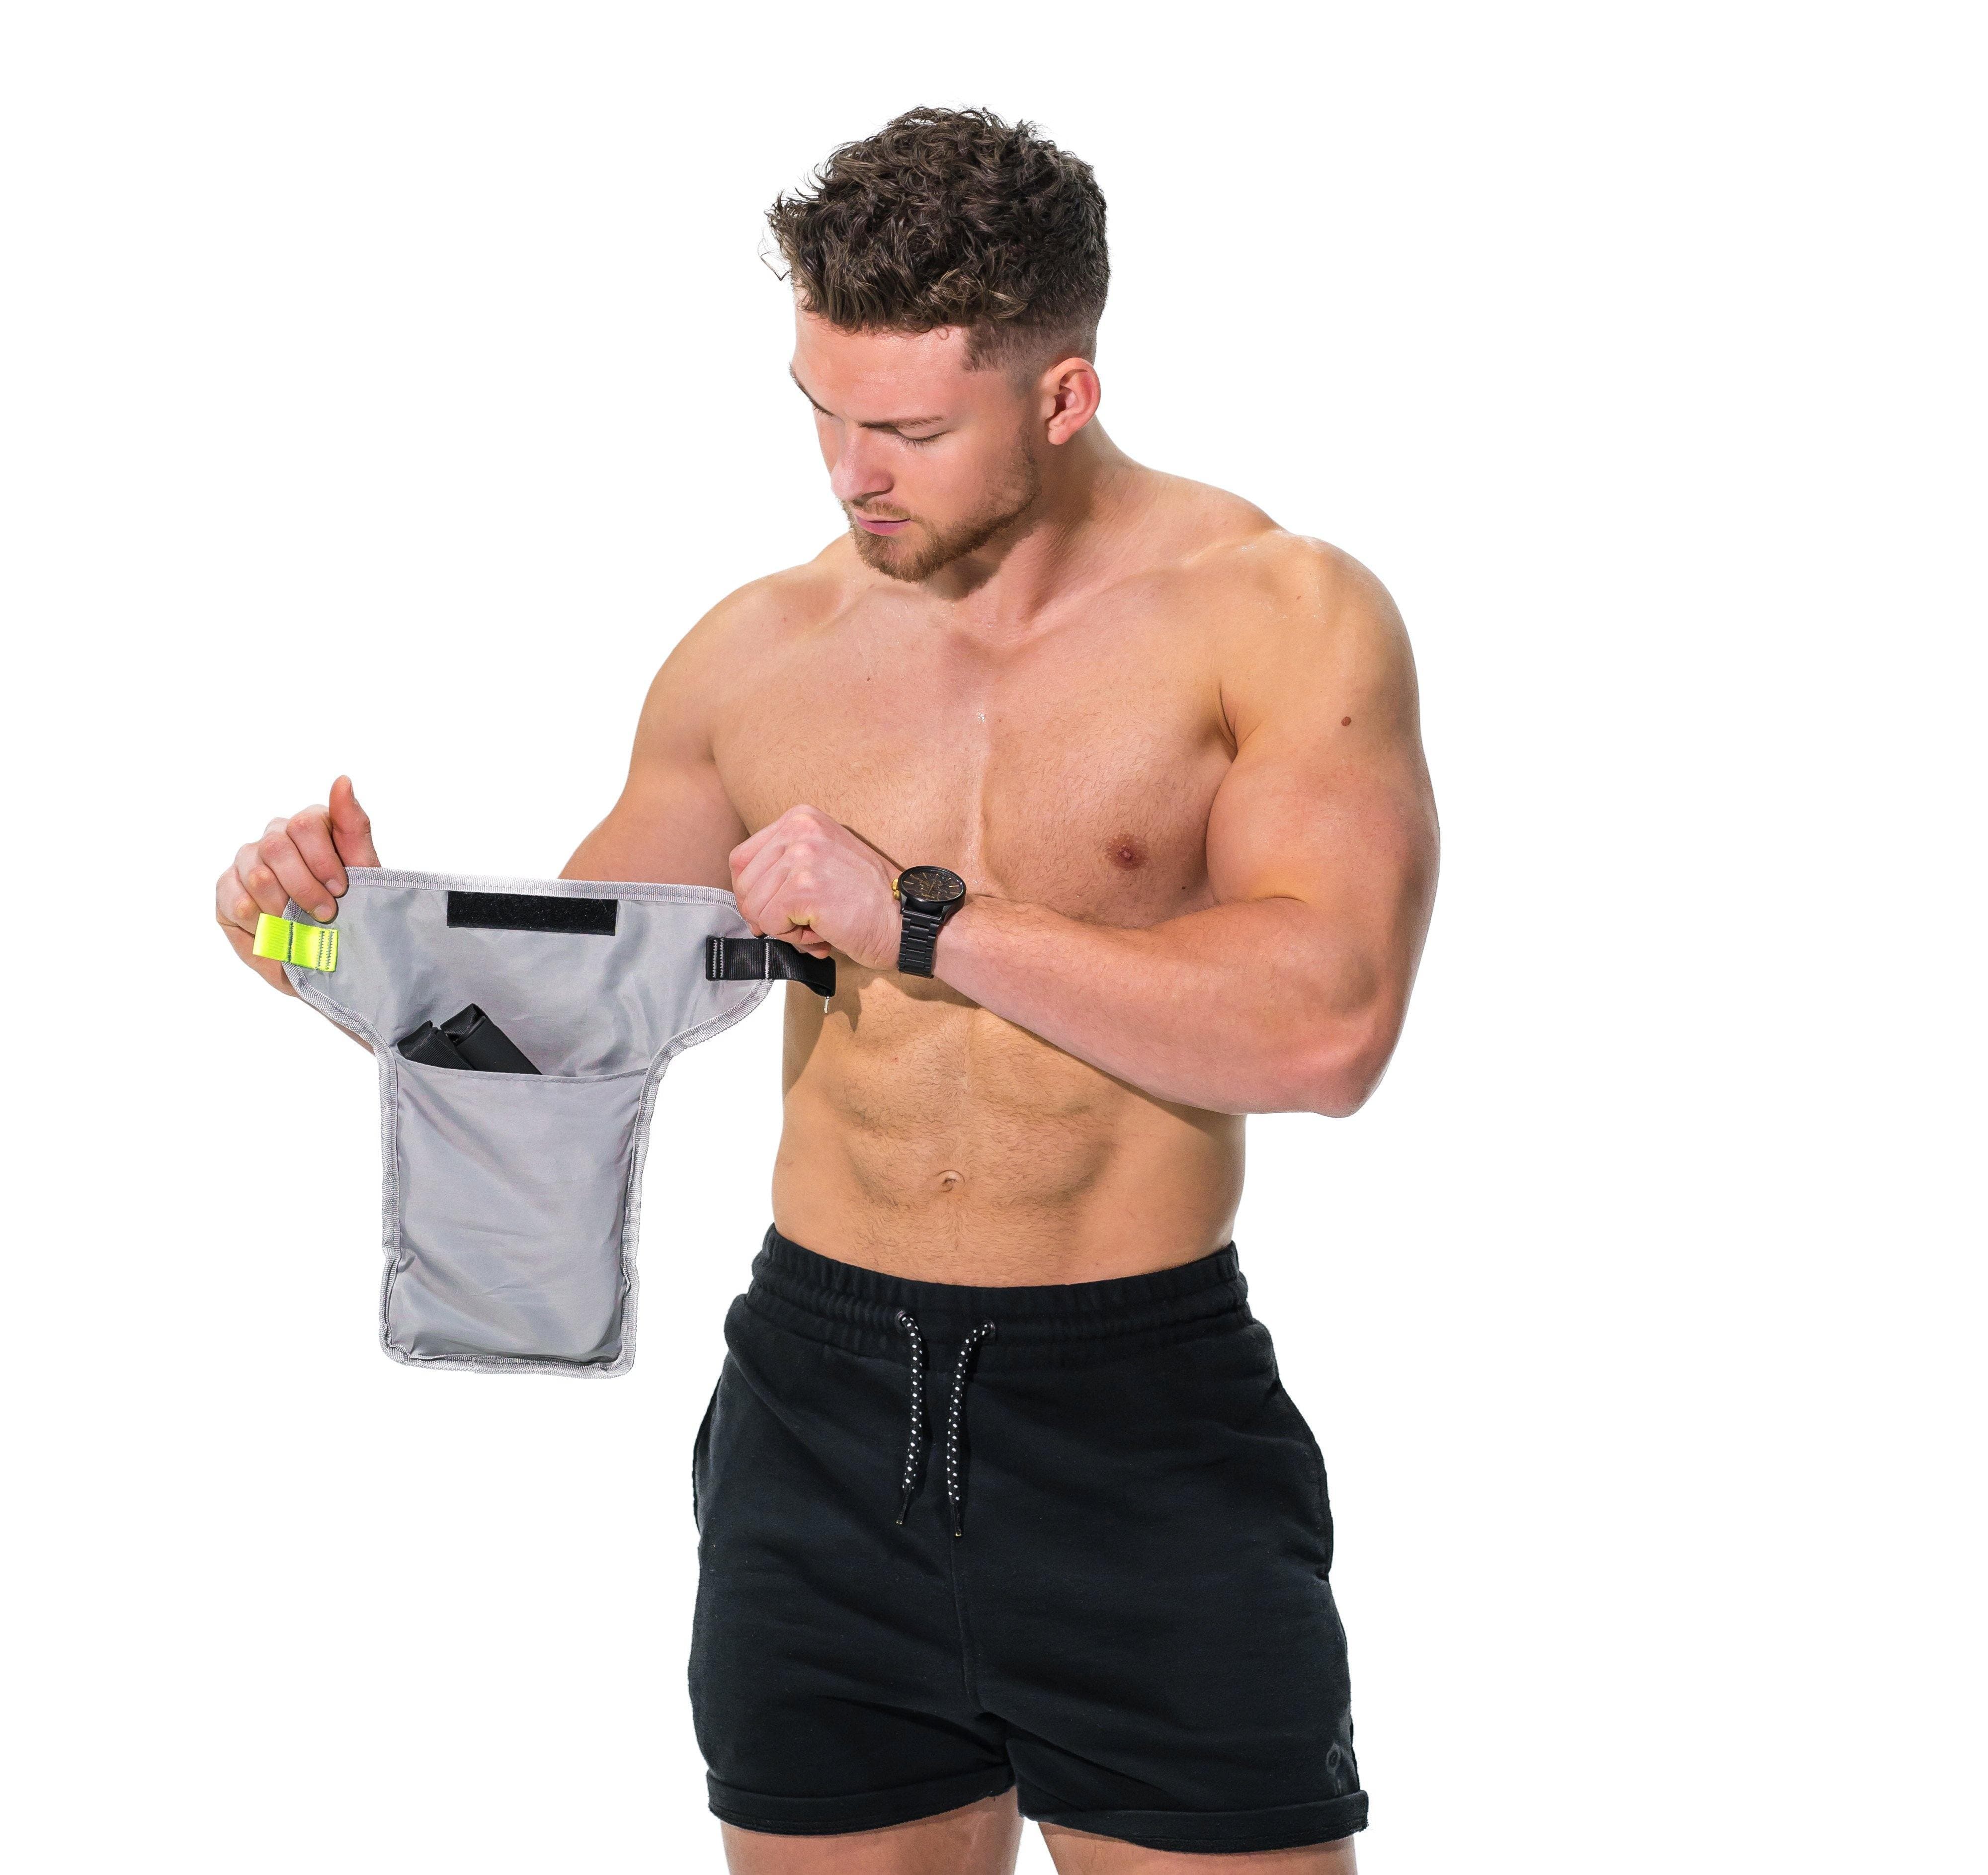 Man modeling the Redge Fit Capsule Available at https://www.getredge.com/products/redge-fit-capsule